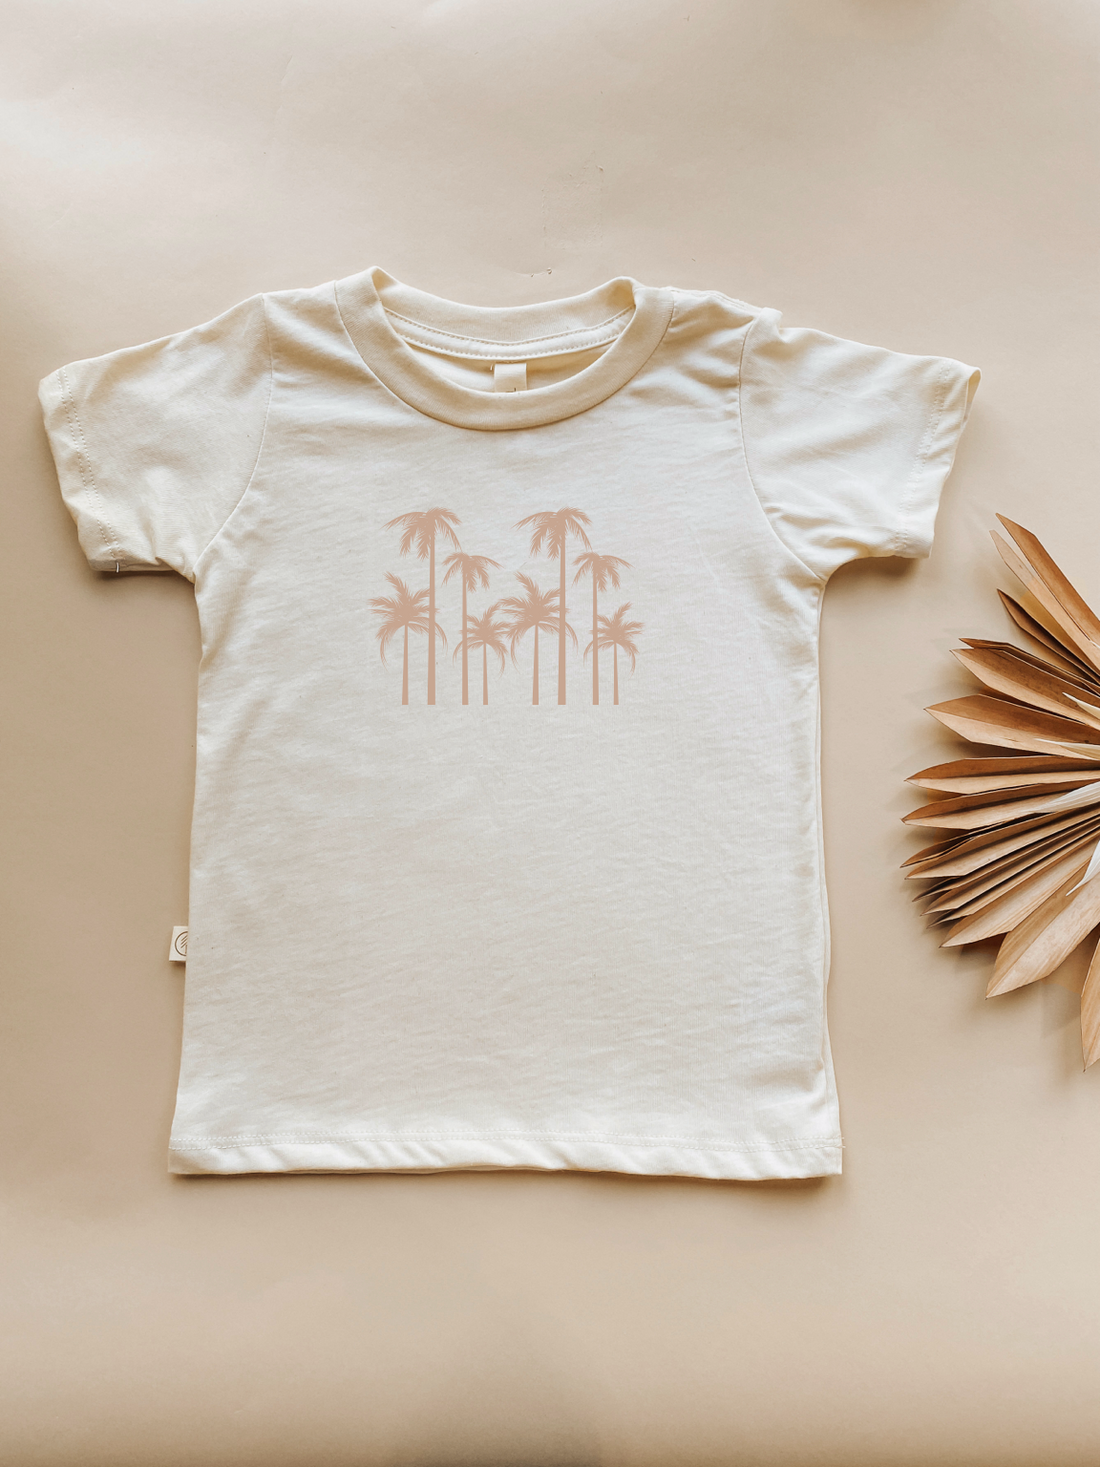 Toddler Crew Neck Tee | Palm Trees in Almond | Organic Cotton